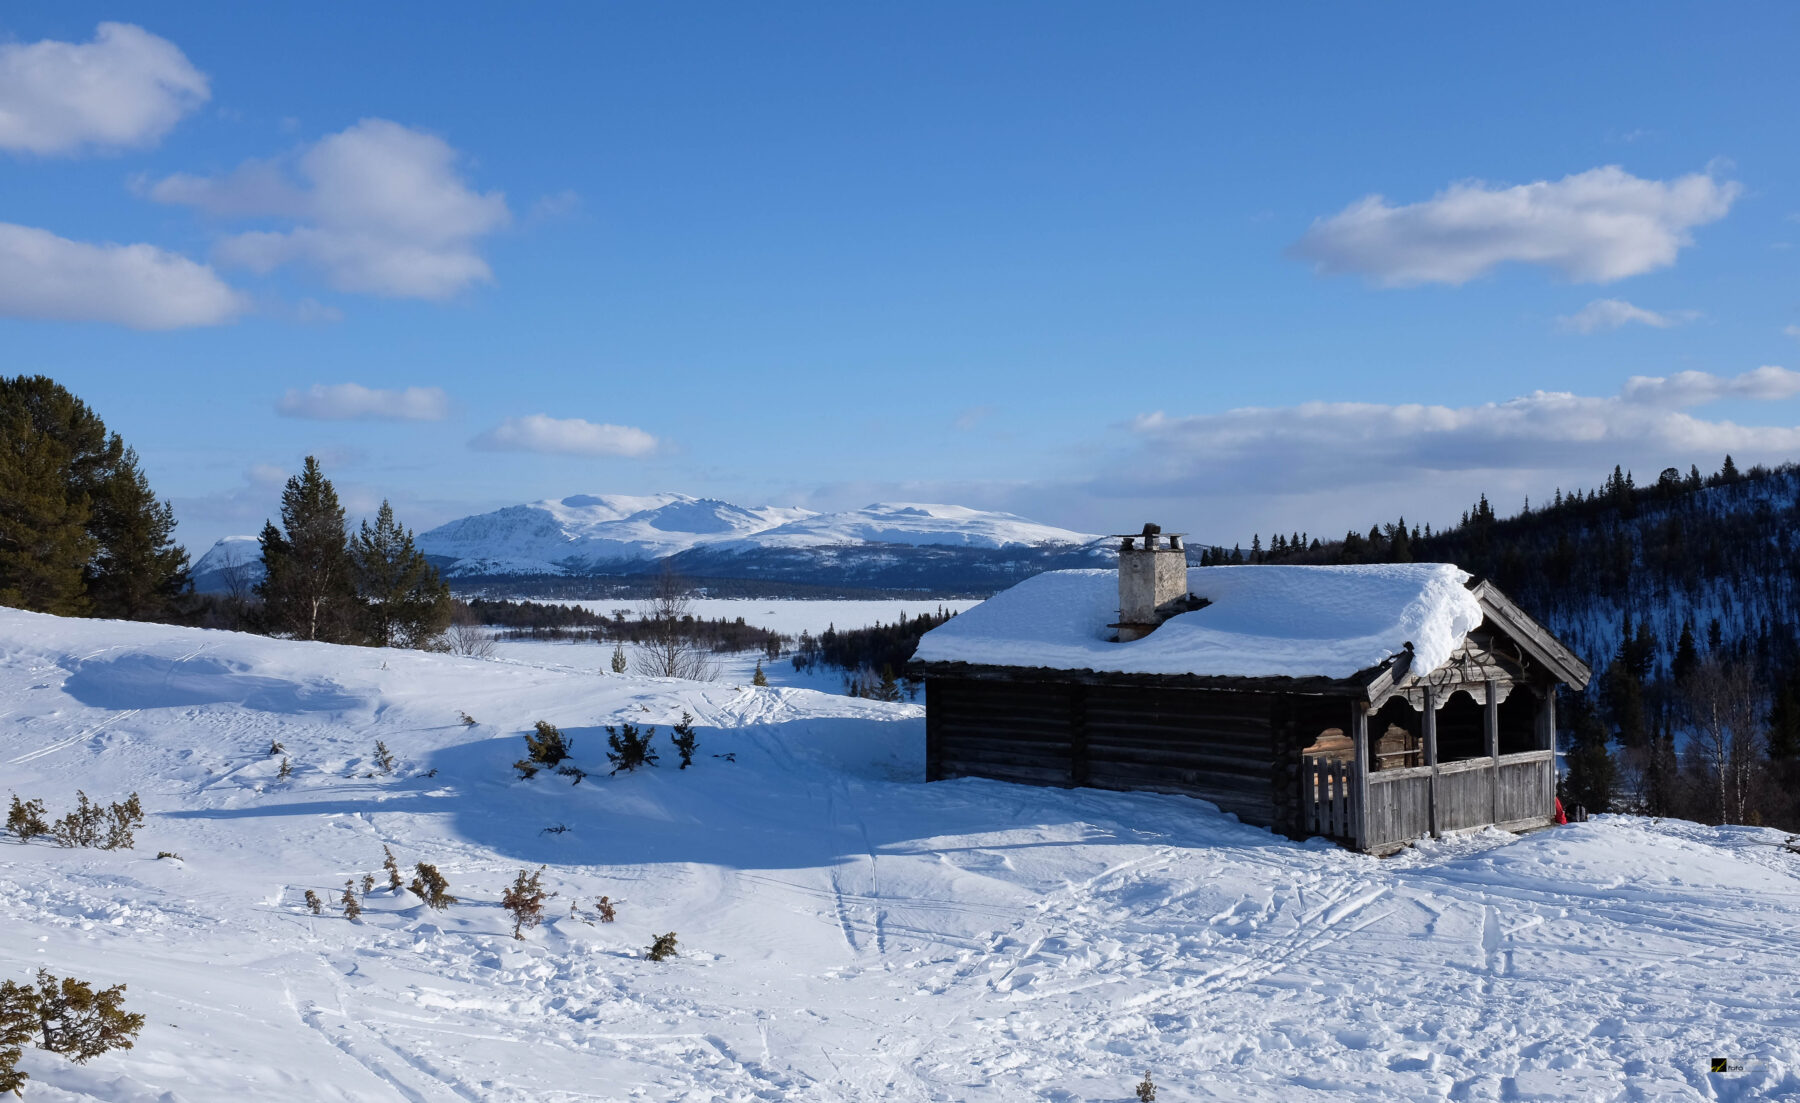 Welcome to the Norwegian hytte. Preferably without water or electricity, these isolated wooden cabins are the best place to celebrate Easter in Norway. Photo: Rune Eilertsen